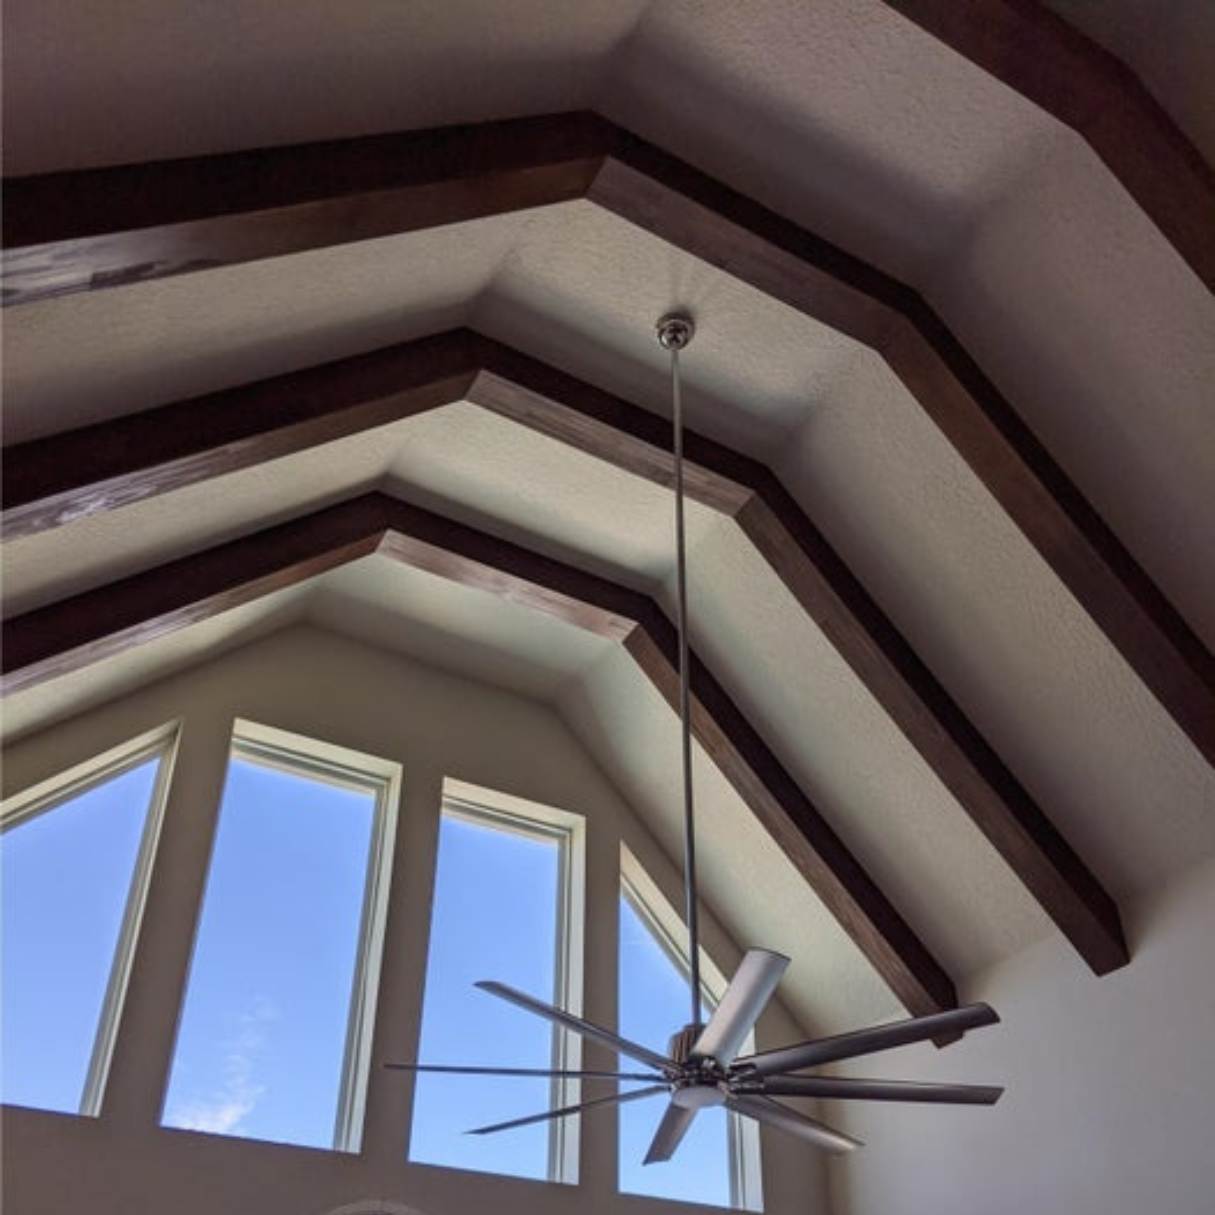 What Is The Appropriate Downrod Size For A 10 Ft Ceiling